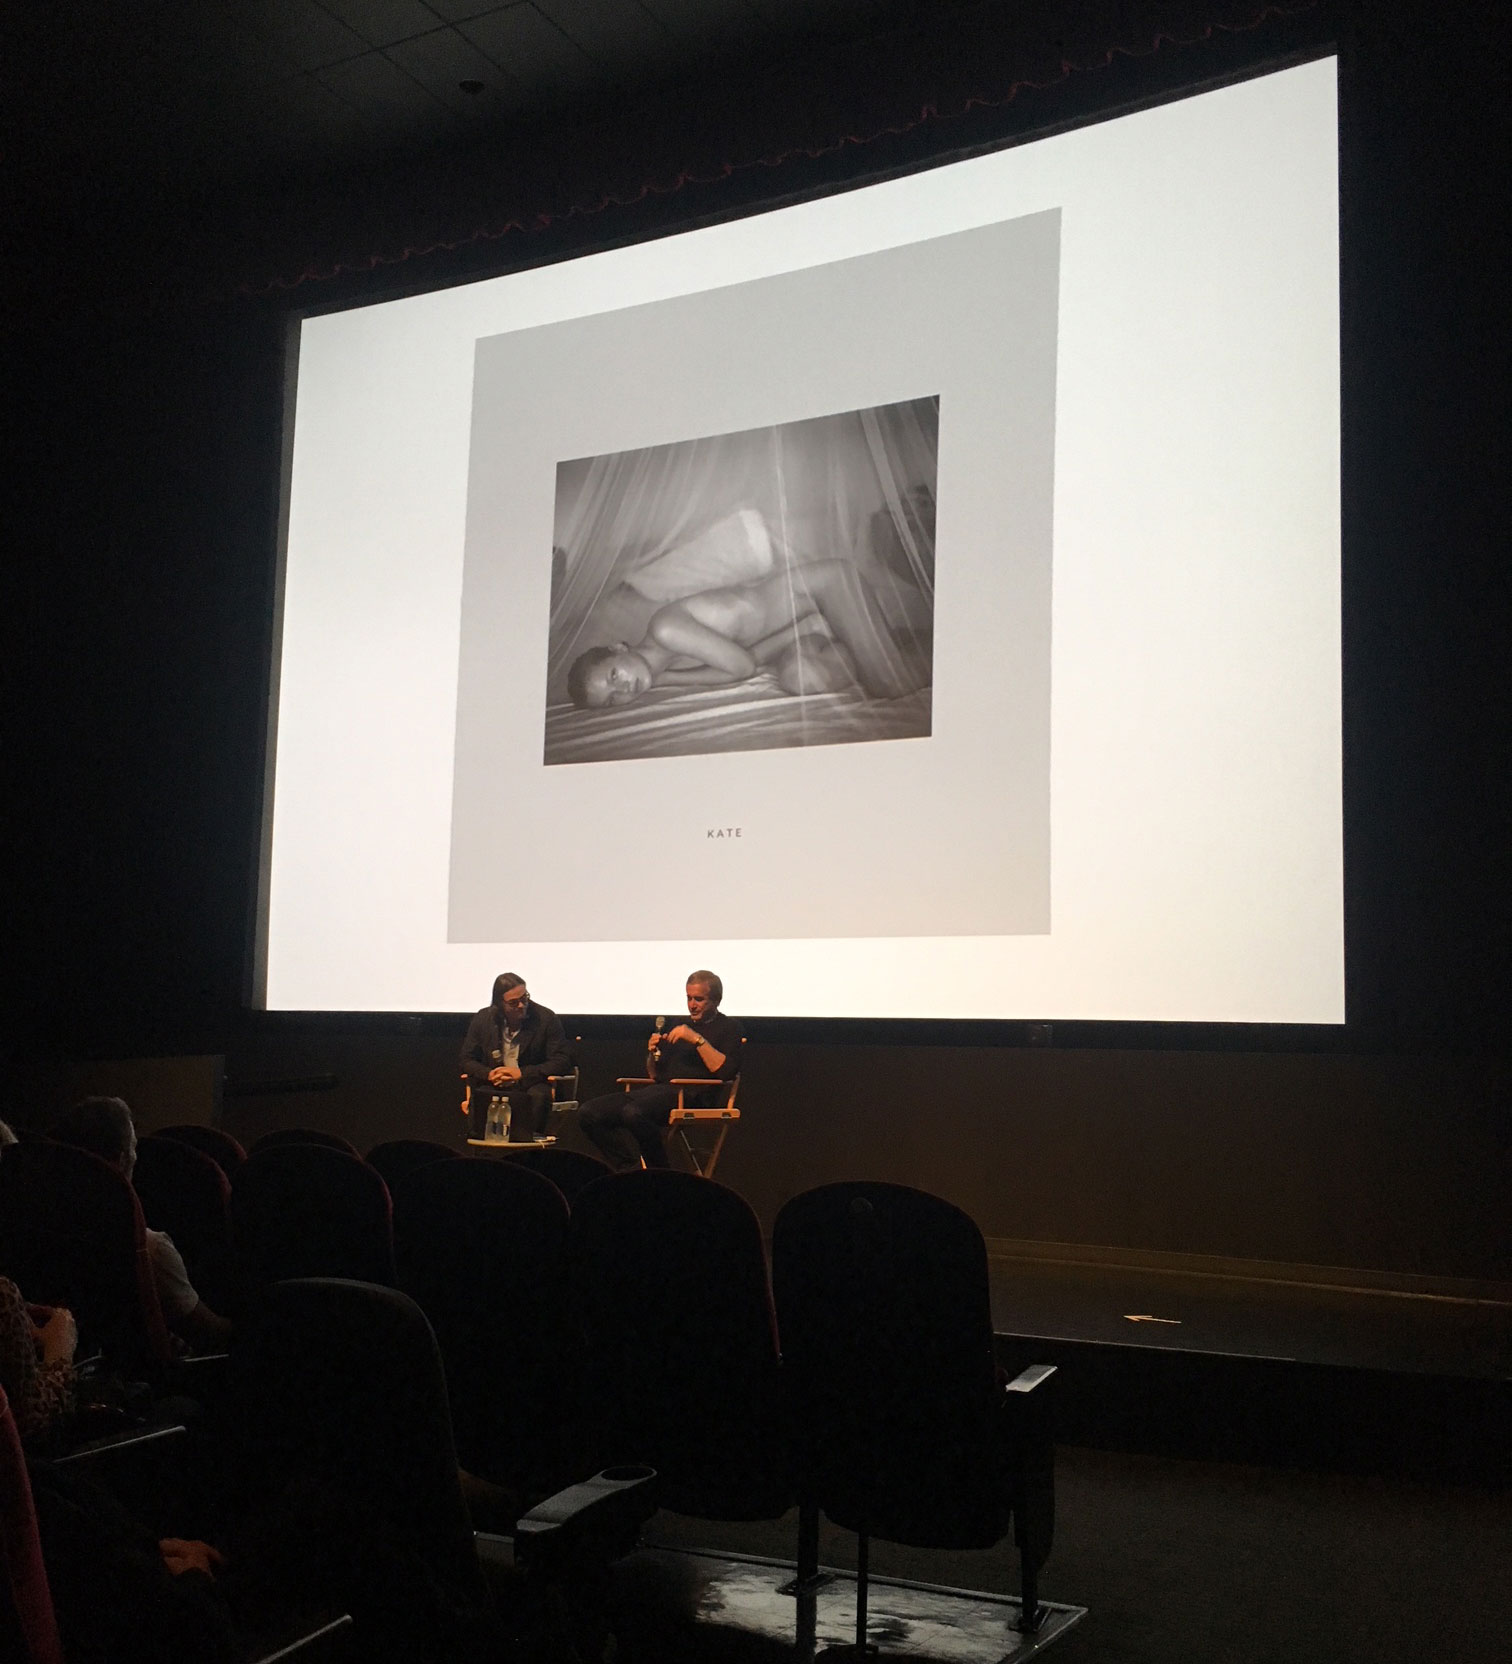 Mario Sorrenti and Dennis Freedman discuss Mario's new book Kate in New York's SVA Theatre earlier this week